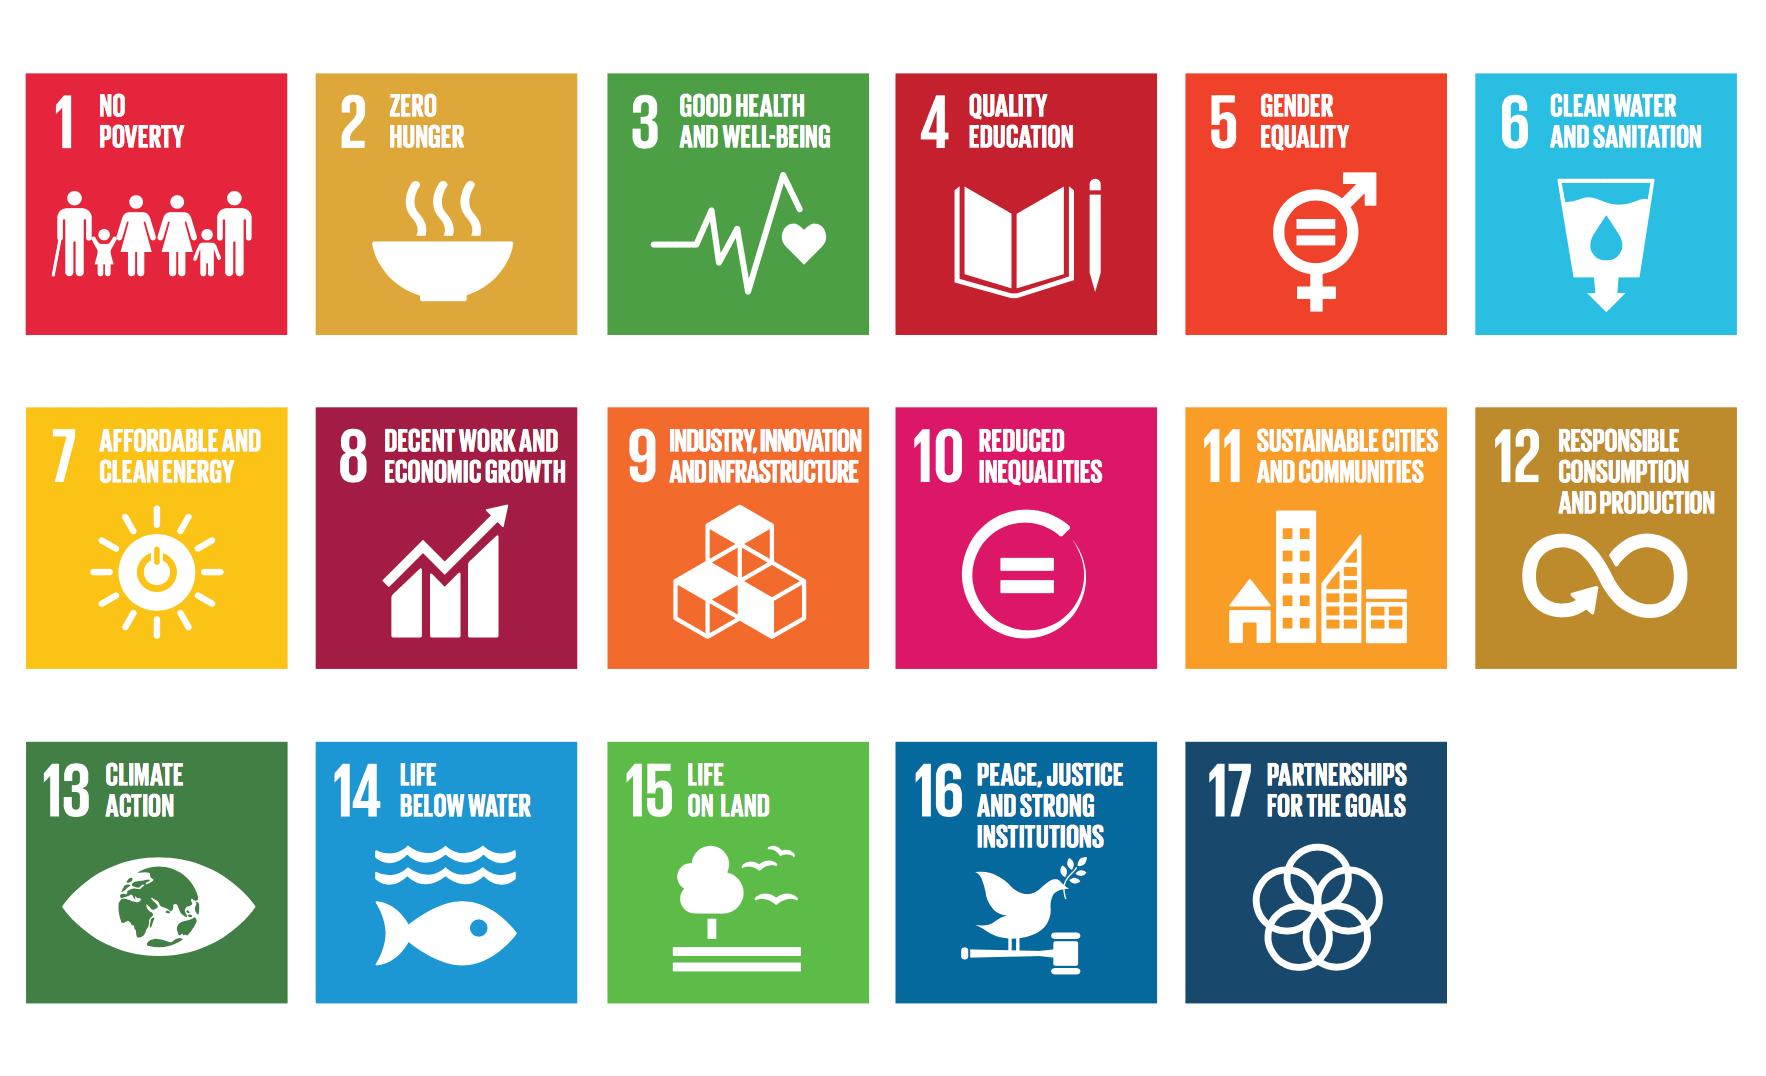 IMF and the SDGs